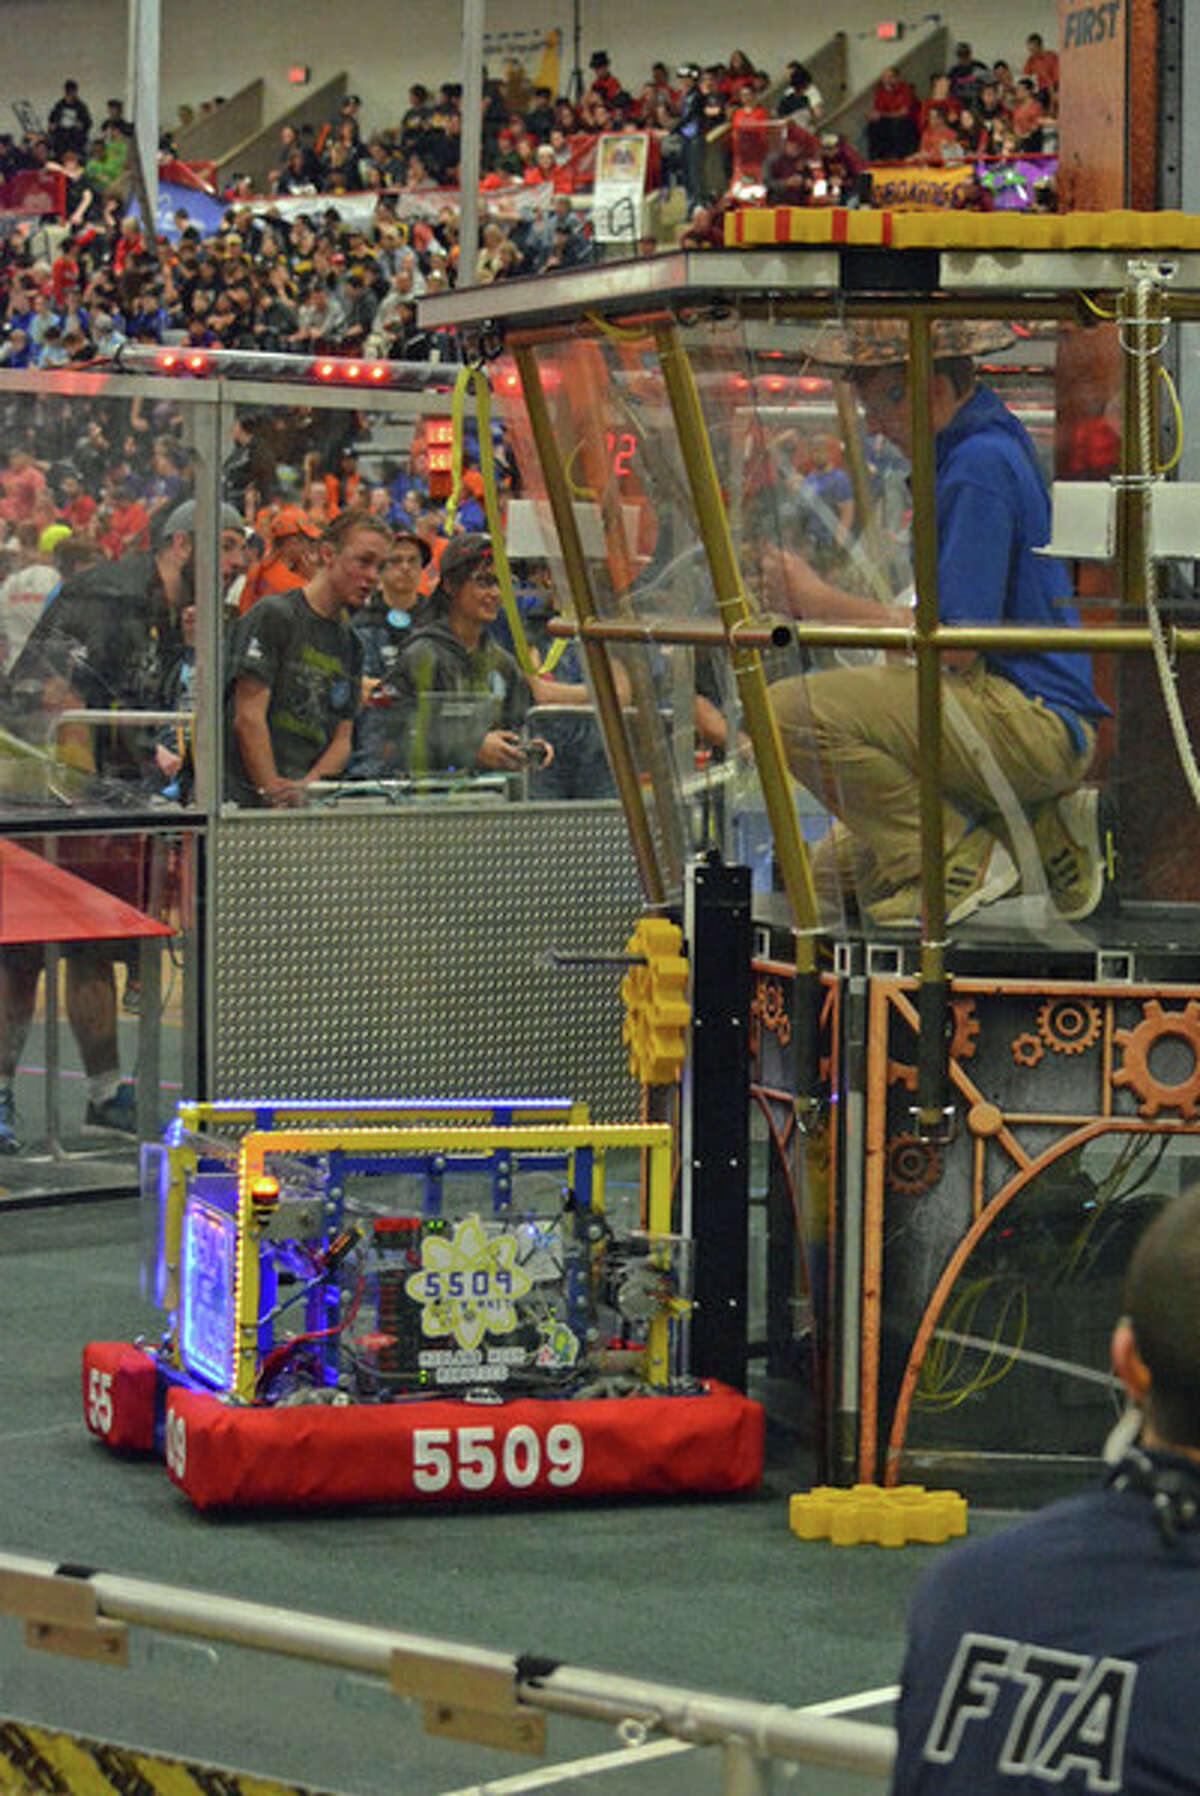 The robot from Midland High's Team 5509 delivering a gear during competition.